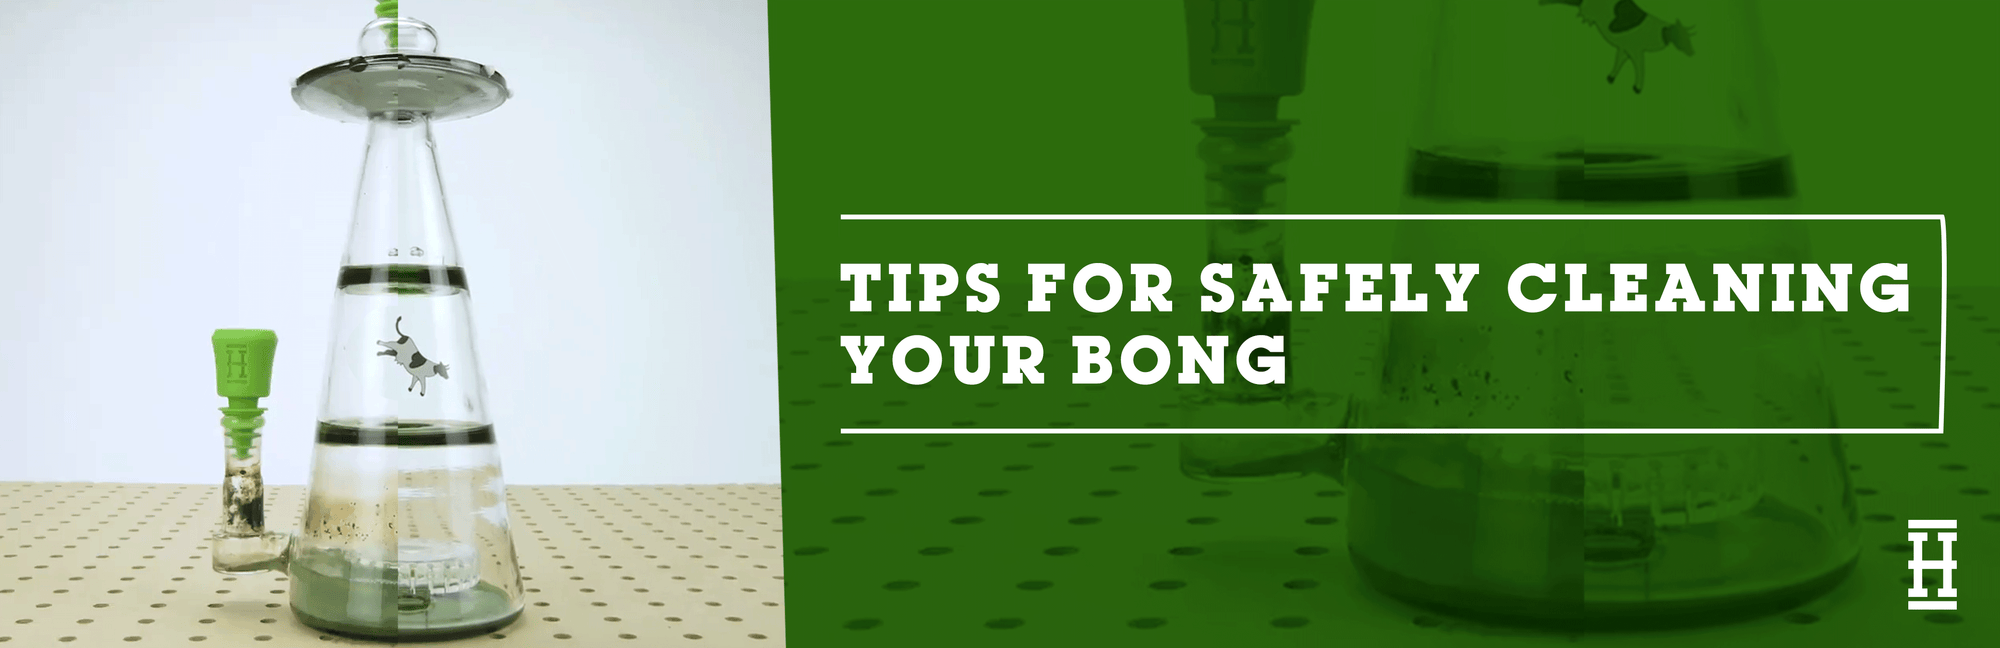 Cleaning Bong Tips